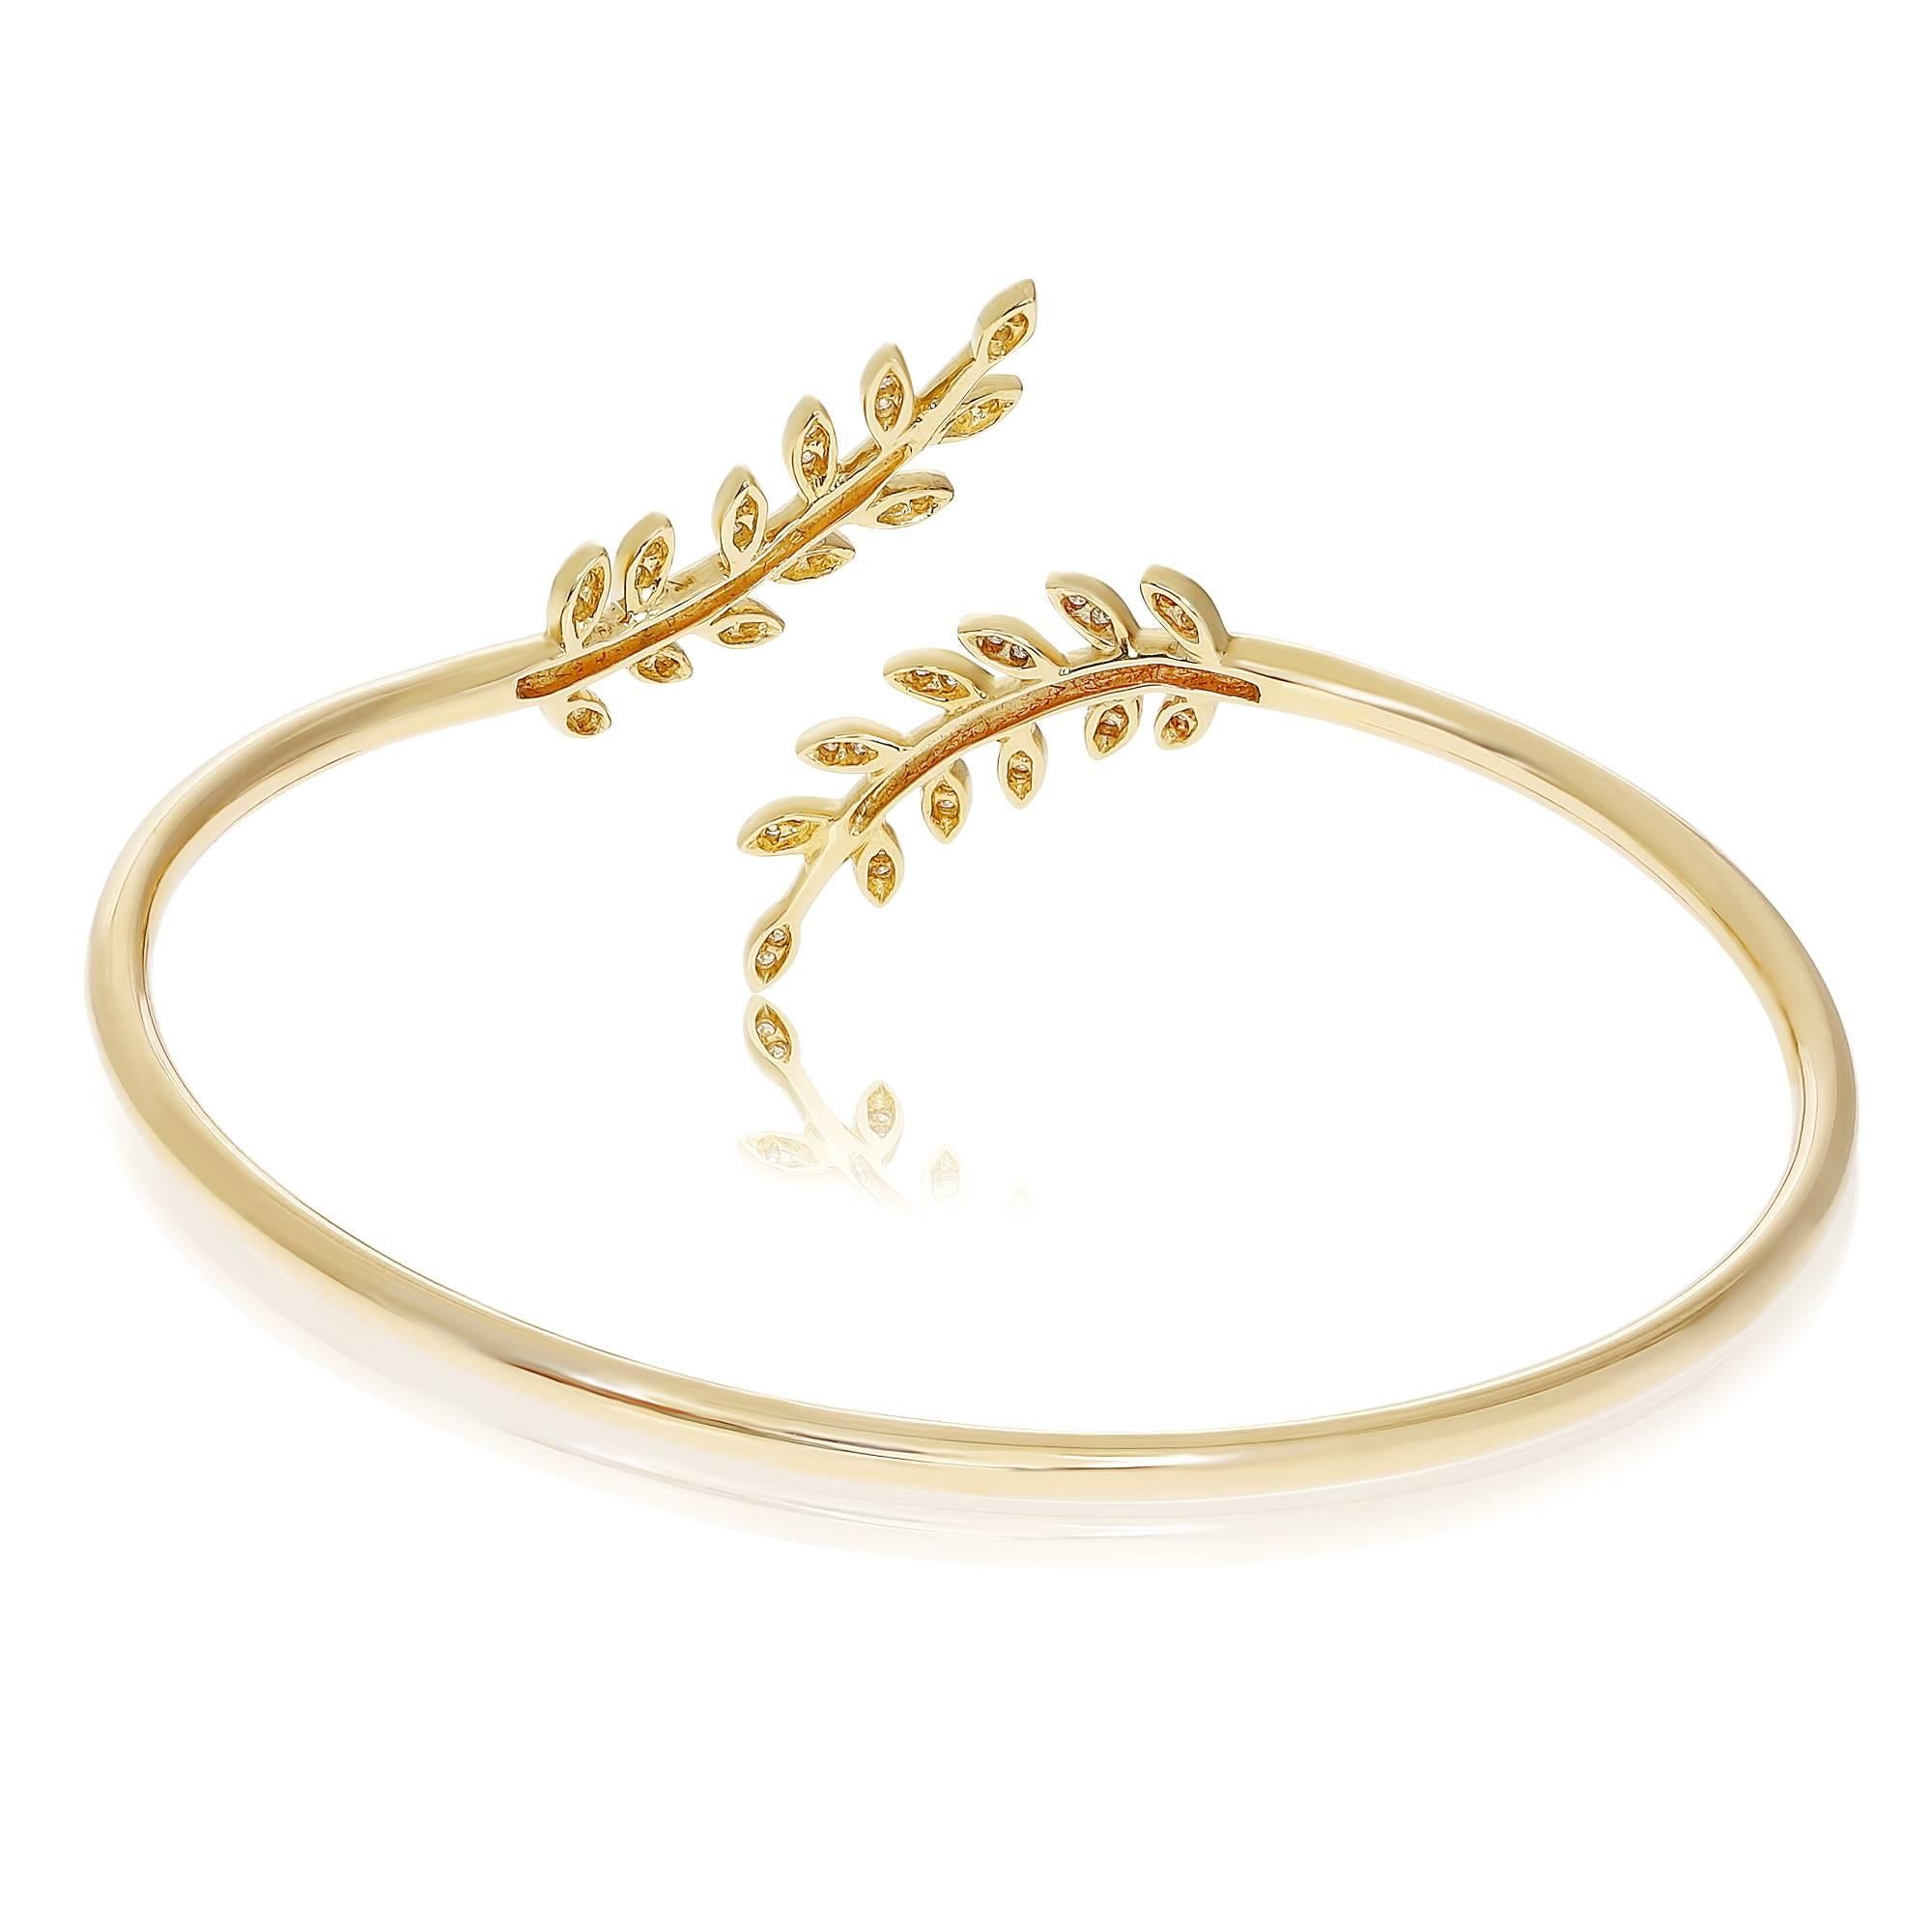 Cuff bangle in yellow gold in leafy pattern with pave set diamonds. Delicate, feminine and classically elegant this yellow gold and diamond cuff bracelet is reminiscent of ancient Roman olive branch motifs. This cuff bracelet contains 0.18 carats of